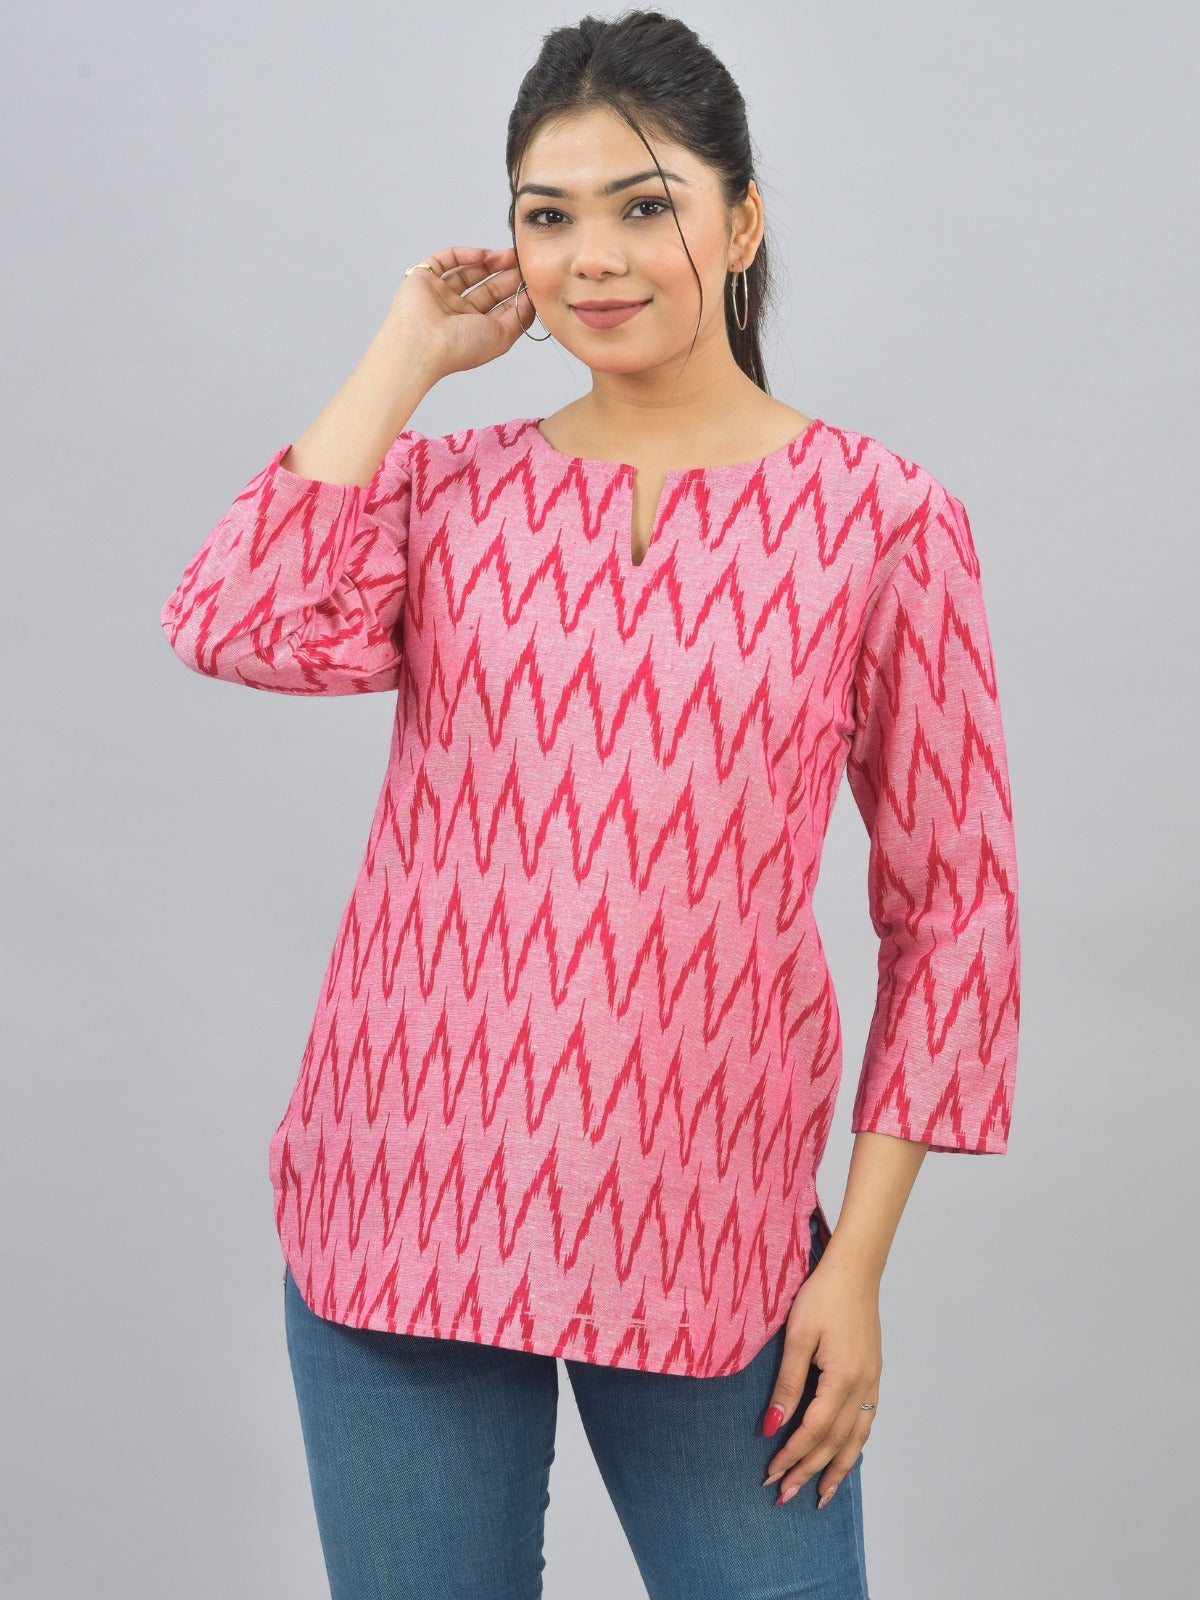 Pack Of 2 Womens Regular Fit Blue Leaf And Pink Zig Zag Printed Tops Combo